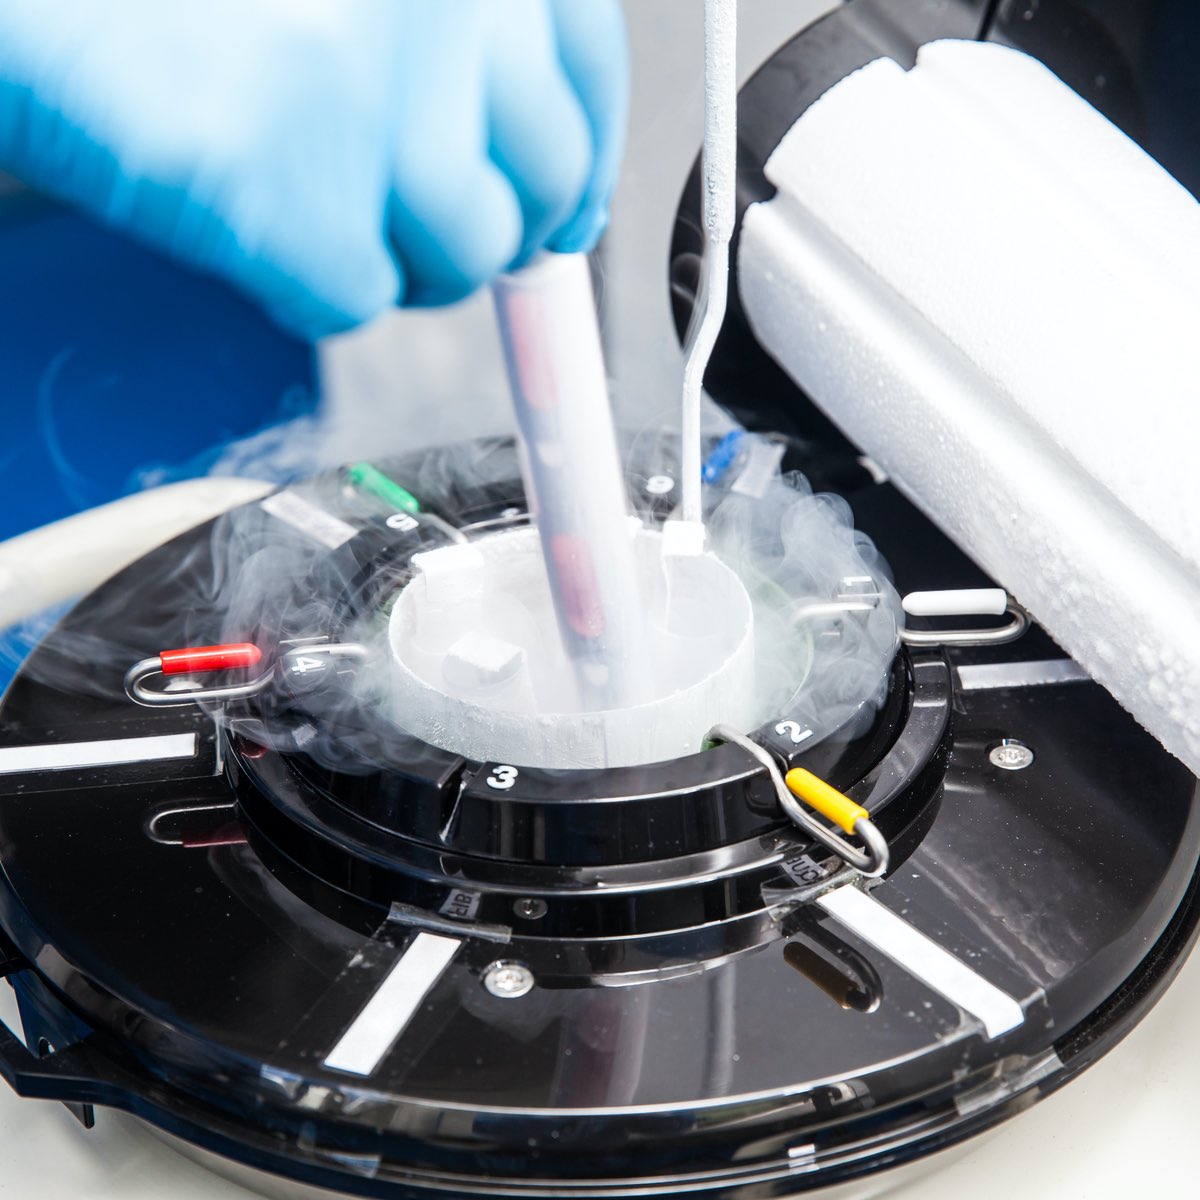 The Woodlands fertility clinic specialist freezing eggs in a lab